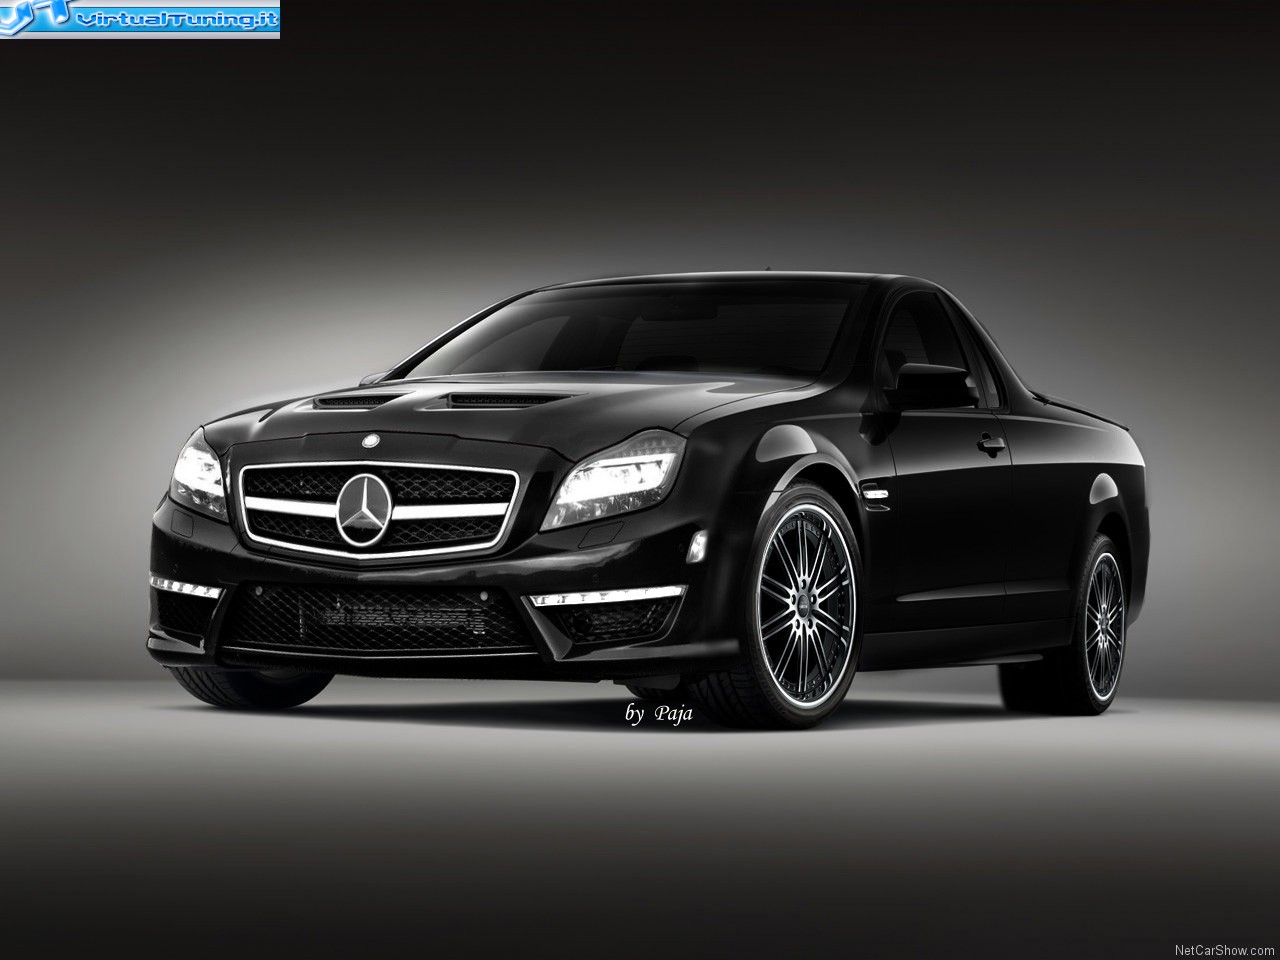 VirtualTuning MERCEDES no model by 